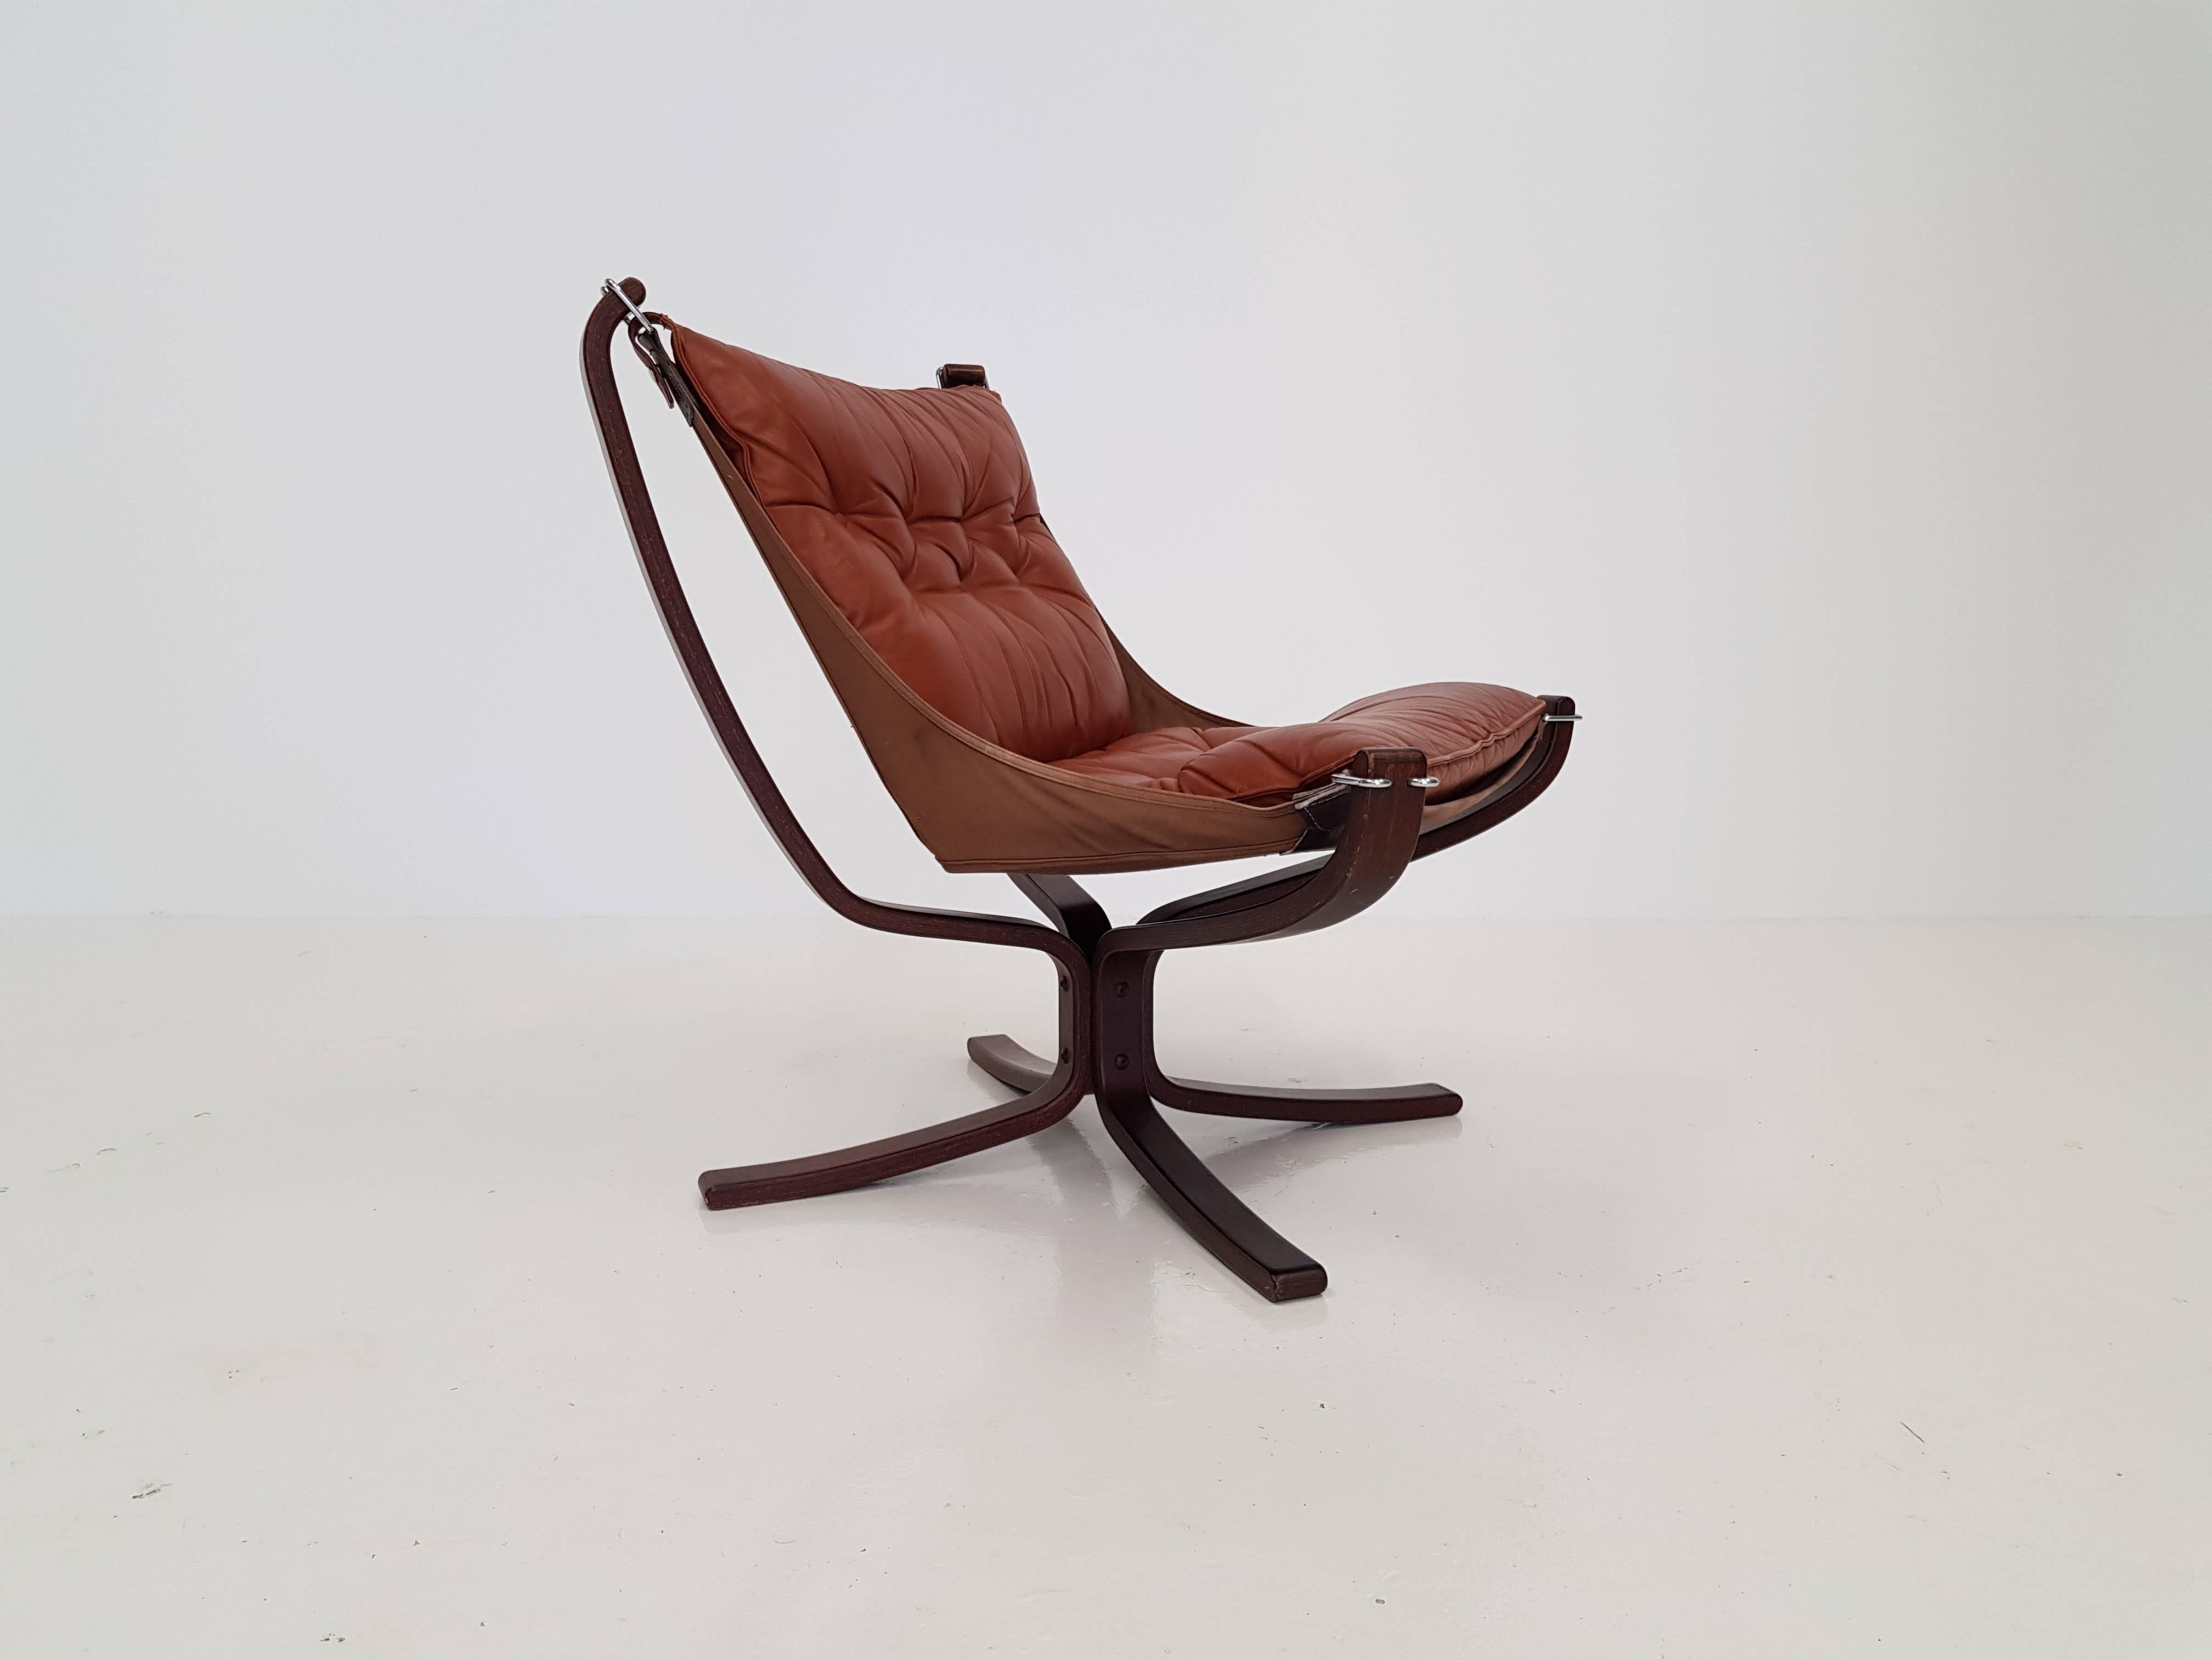 Vintage Low-Backed X-Framed Sigurd Ressell Designed Falcon Chair, 1970s In Good Condition In London Road, Baldock, Hertfordshire